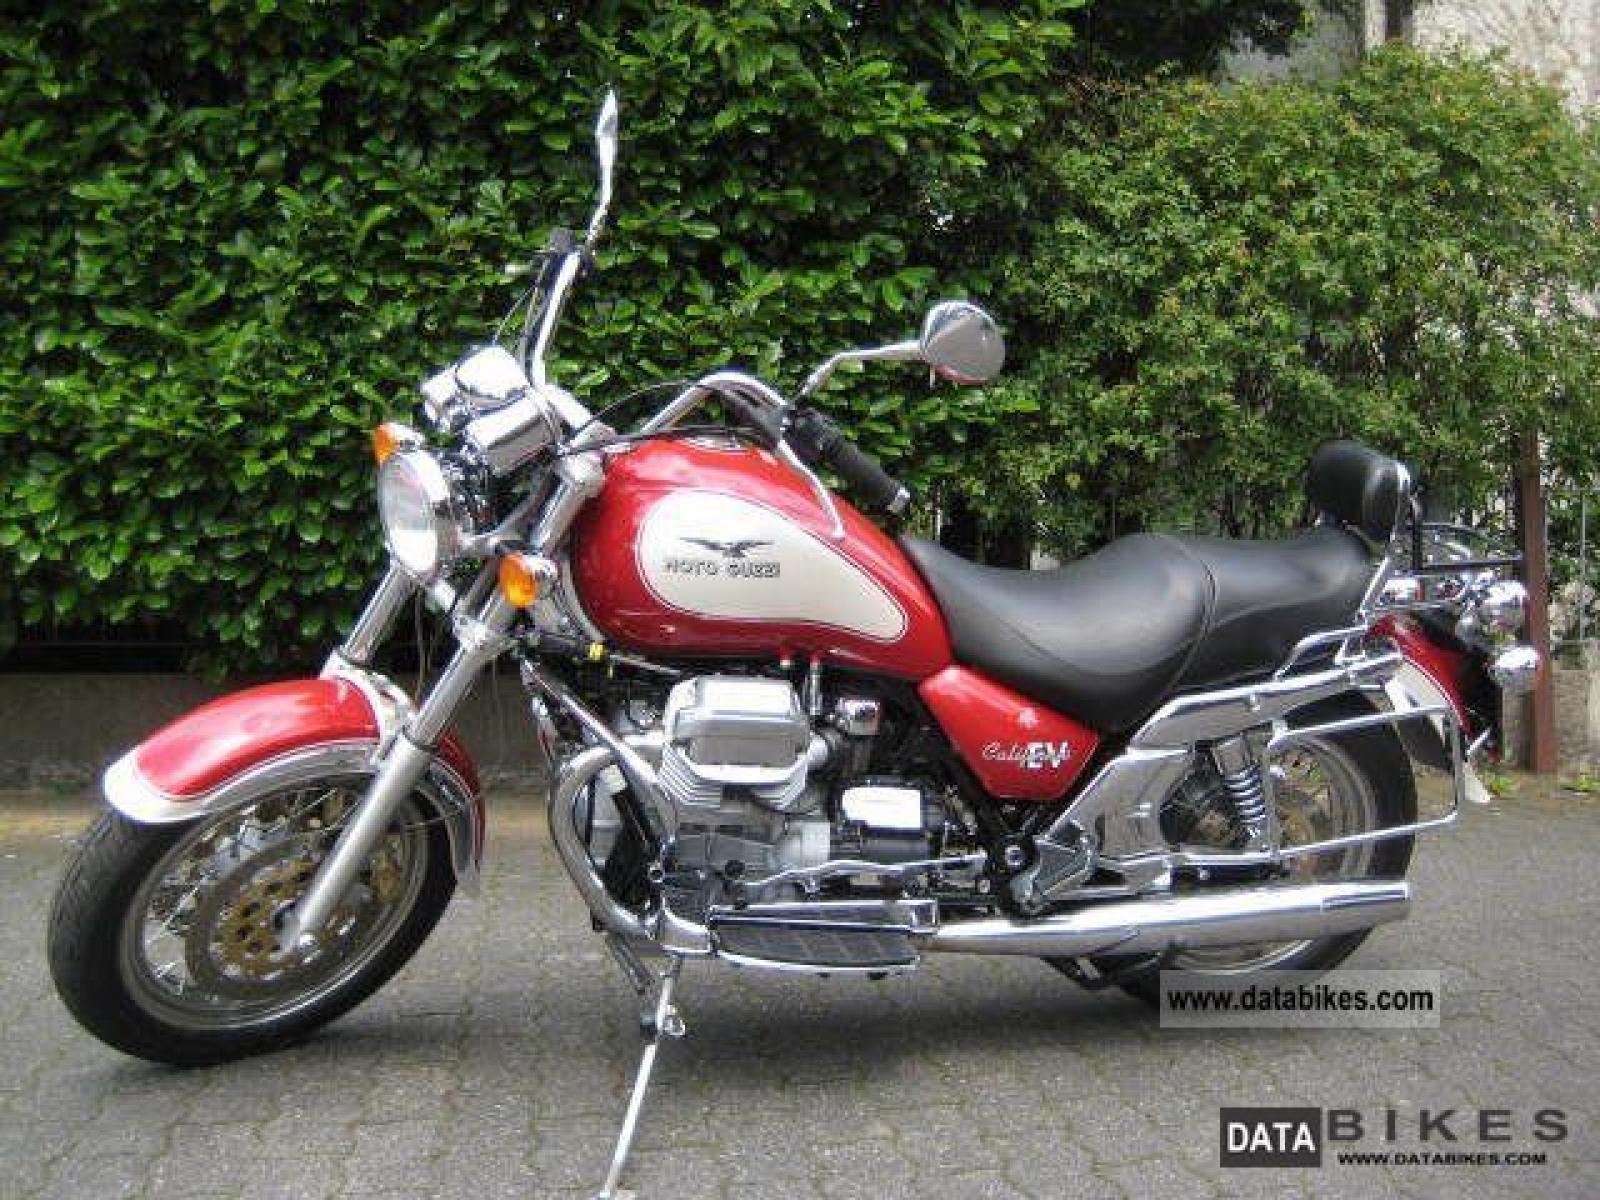 1998 Moto Guzzi 1100 California Ev Specifications And Pictures